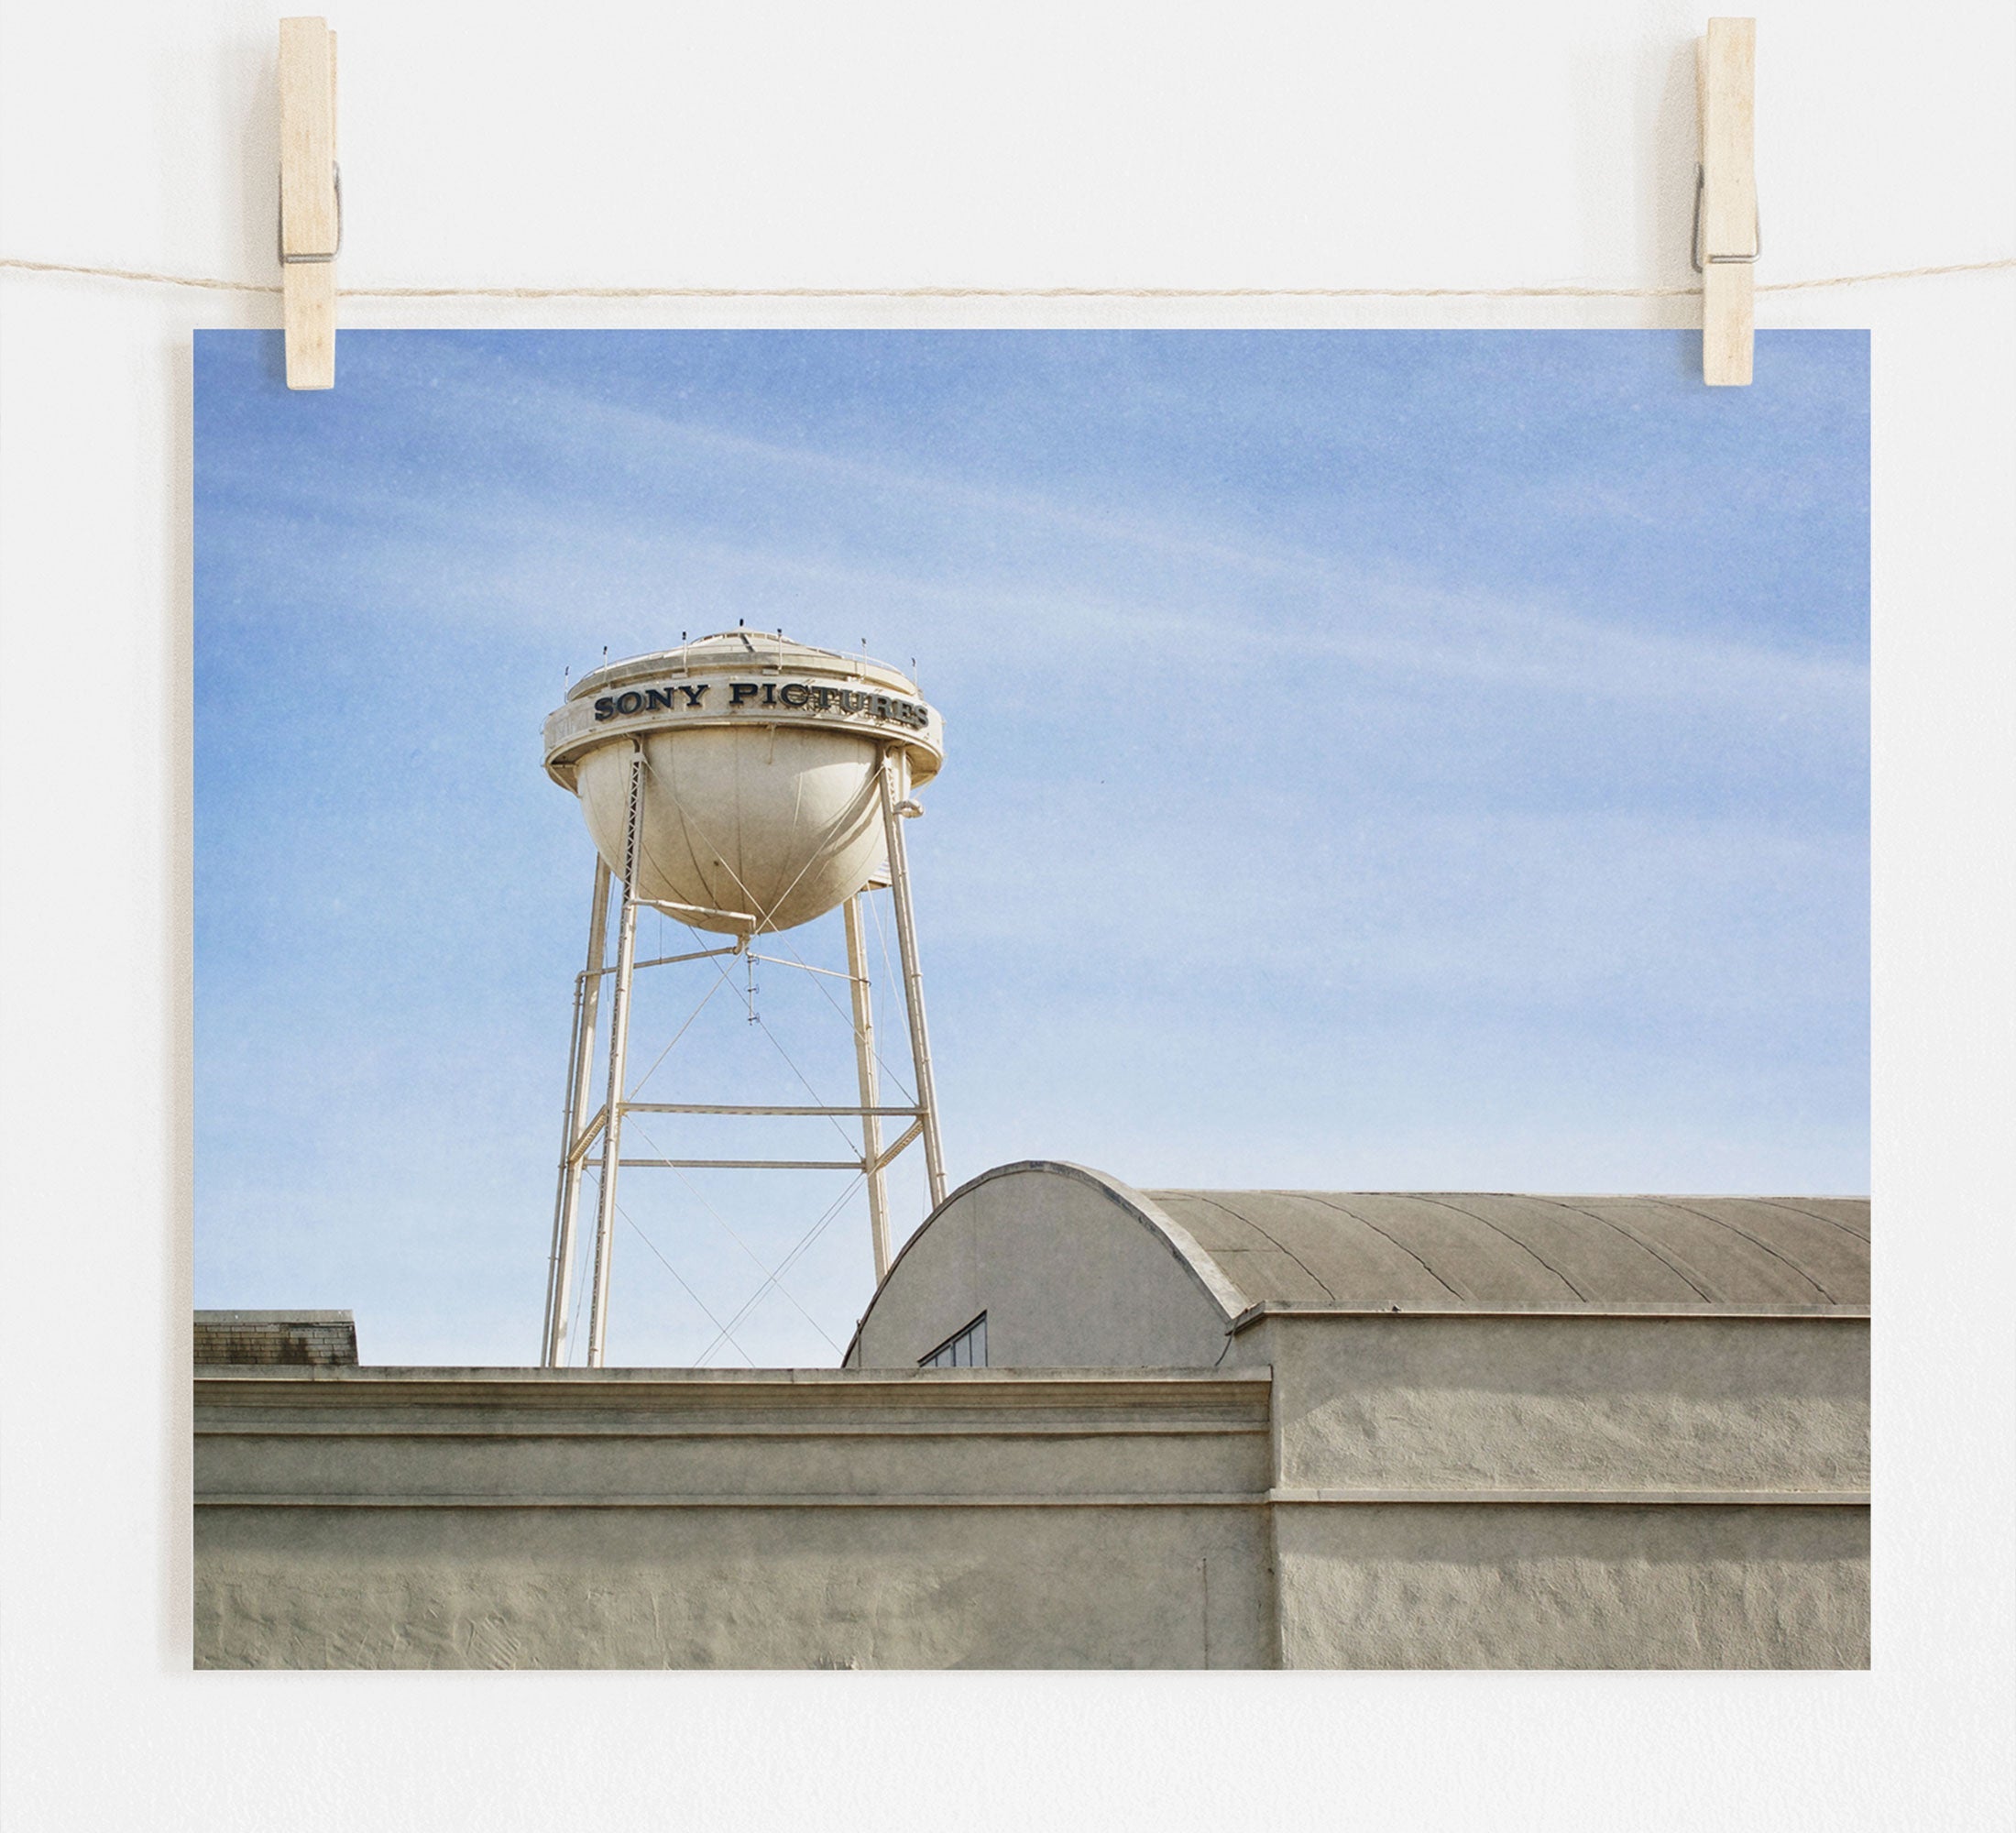 A photo of a water tower labeled &quot;Sony Studios&quot; against a clear sky, seemingly displayed as an unframed print hanging by clips on a wire. This is the Los Angeles Sony Pictures Studio Print by Offley Green, also known as the &#39;Sony Lot&#39; print.